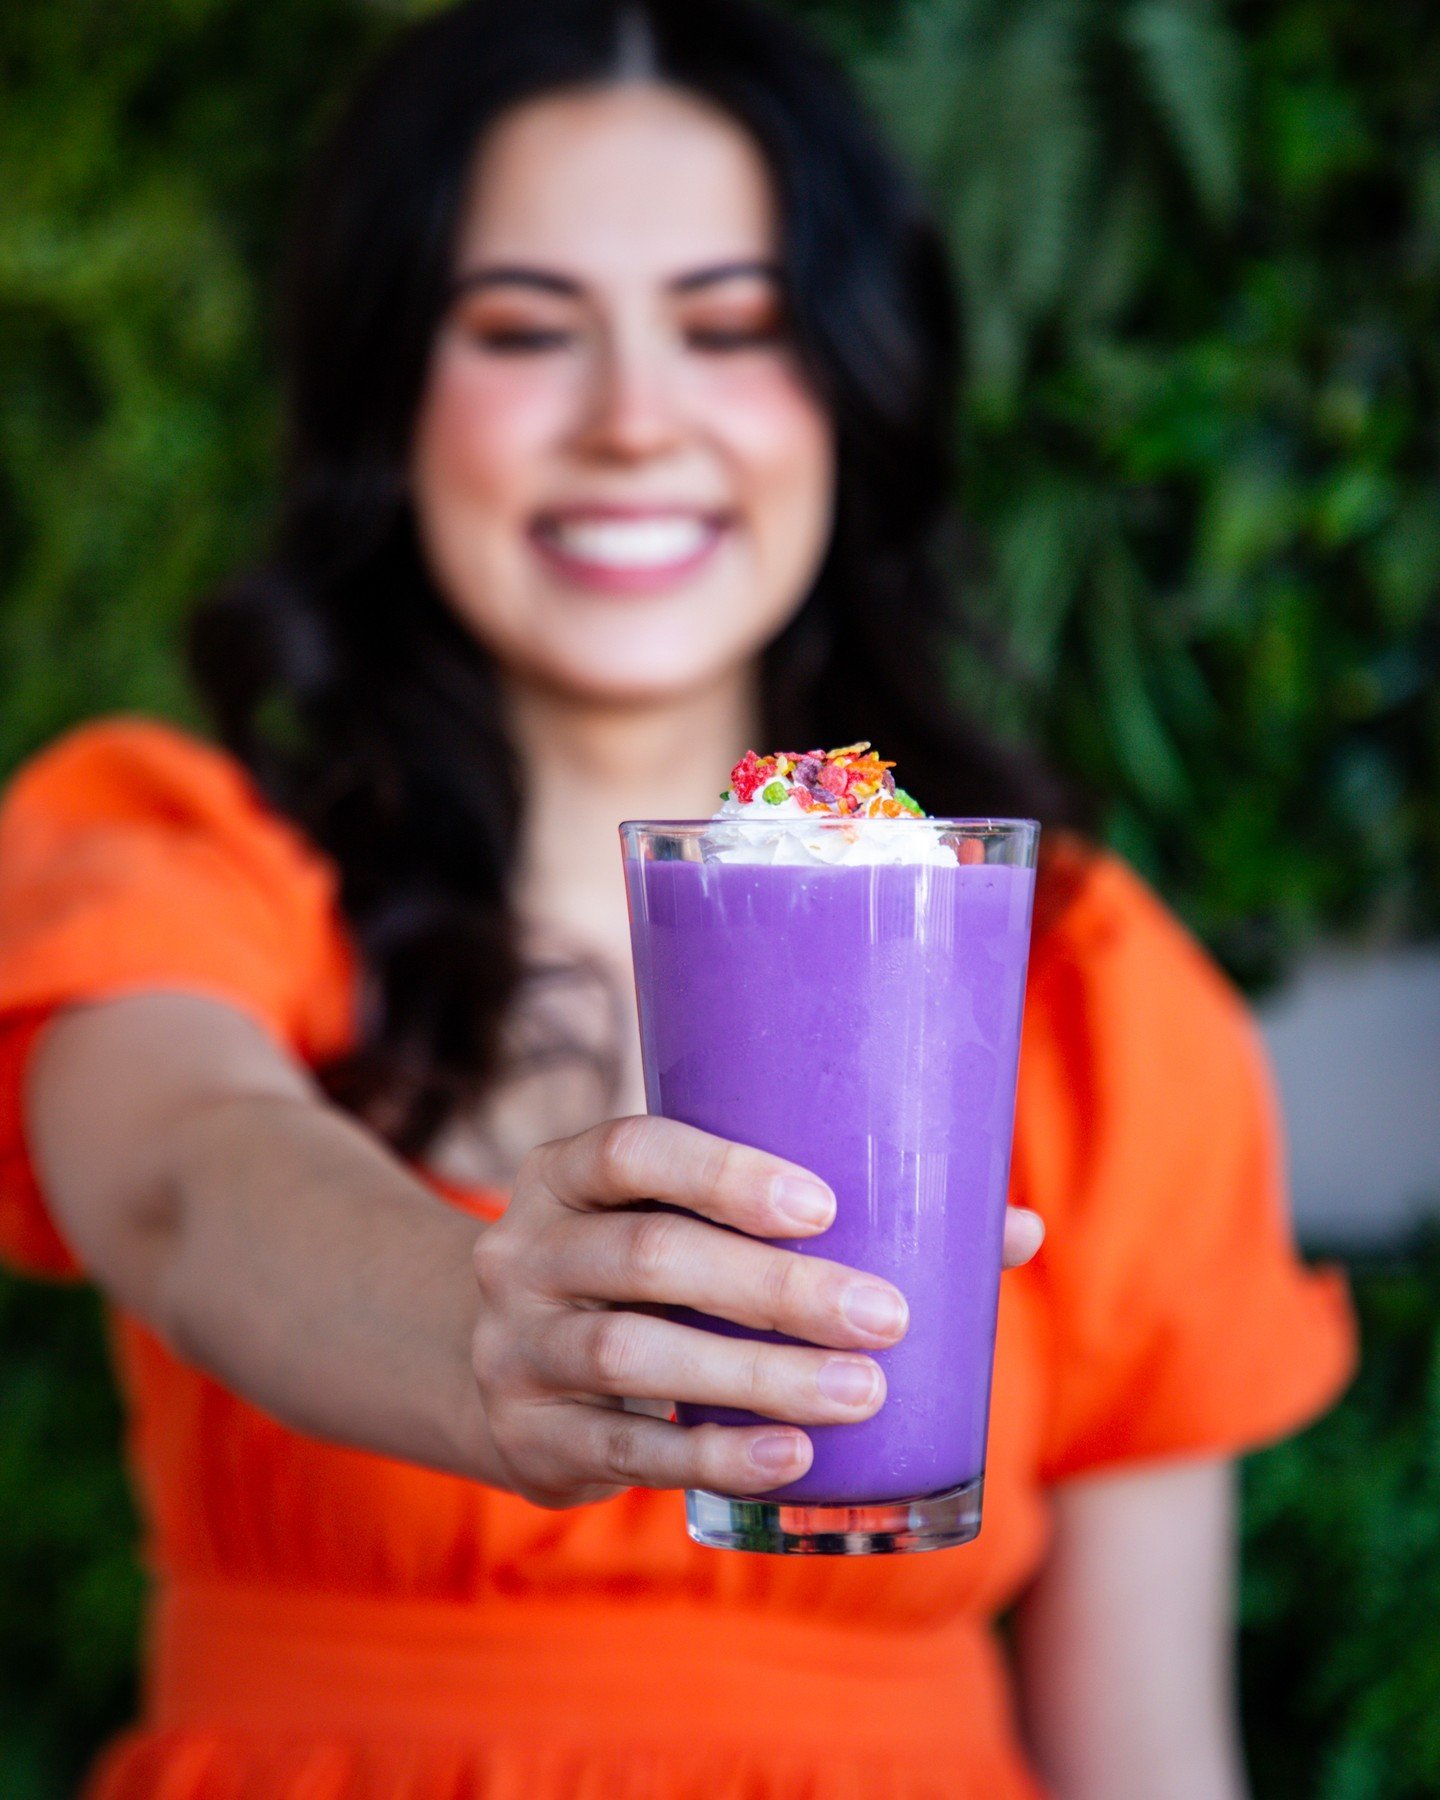 Did you really celebrate #EeyoresBirthday if you didn't stop by for our Shake of the Month? 🥳

𝙀𝙚𝙮𝙤𝙧𝙚'𝙨 𝘽𝙞𝙧𝙩𝙝𝙙𝙖𝙮 𝙎𝙝𝙖𝙠𝙚: Made with Ube @amysicecreams and topped with Fruity Pebbles! 🌈

#24Diner #DowntownAustin #EeyoresBirthday #C